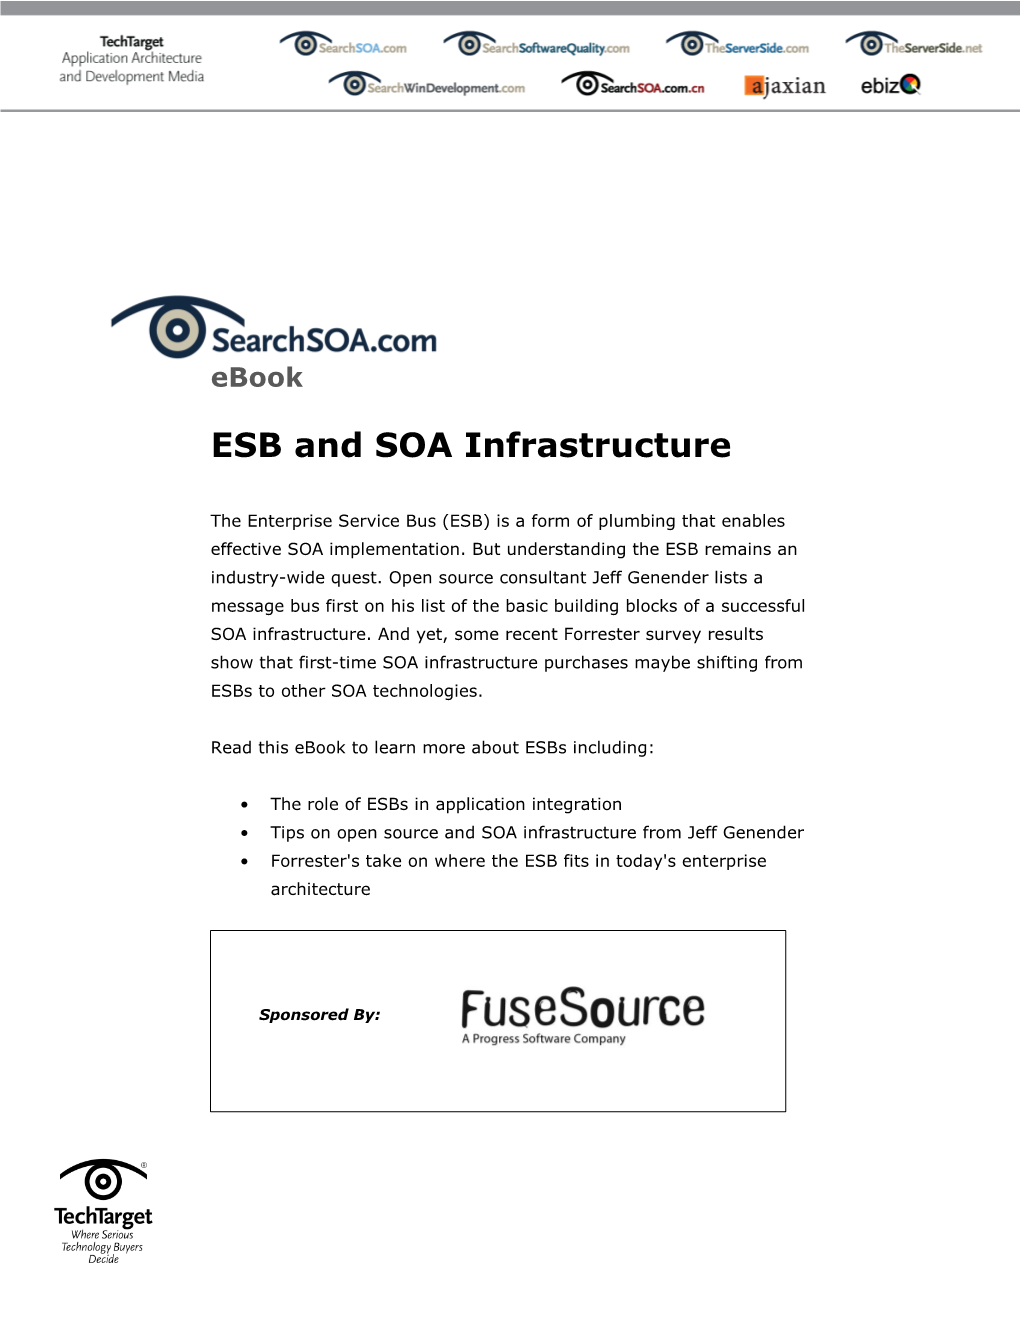 ESB and SOA Infrastructure